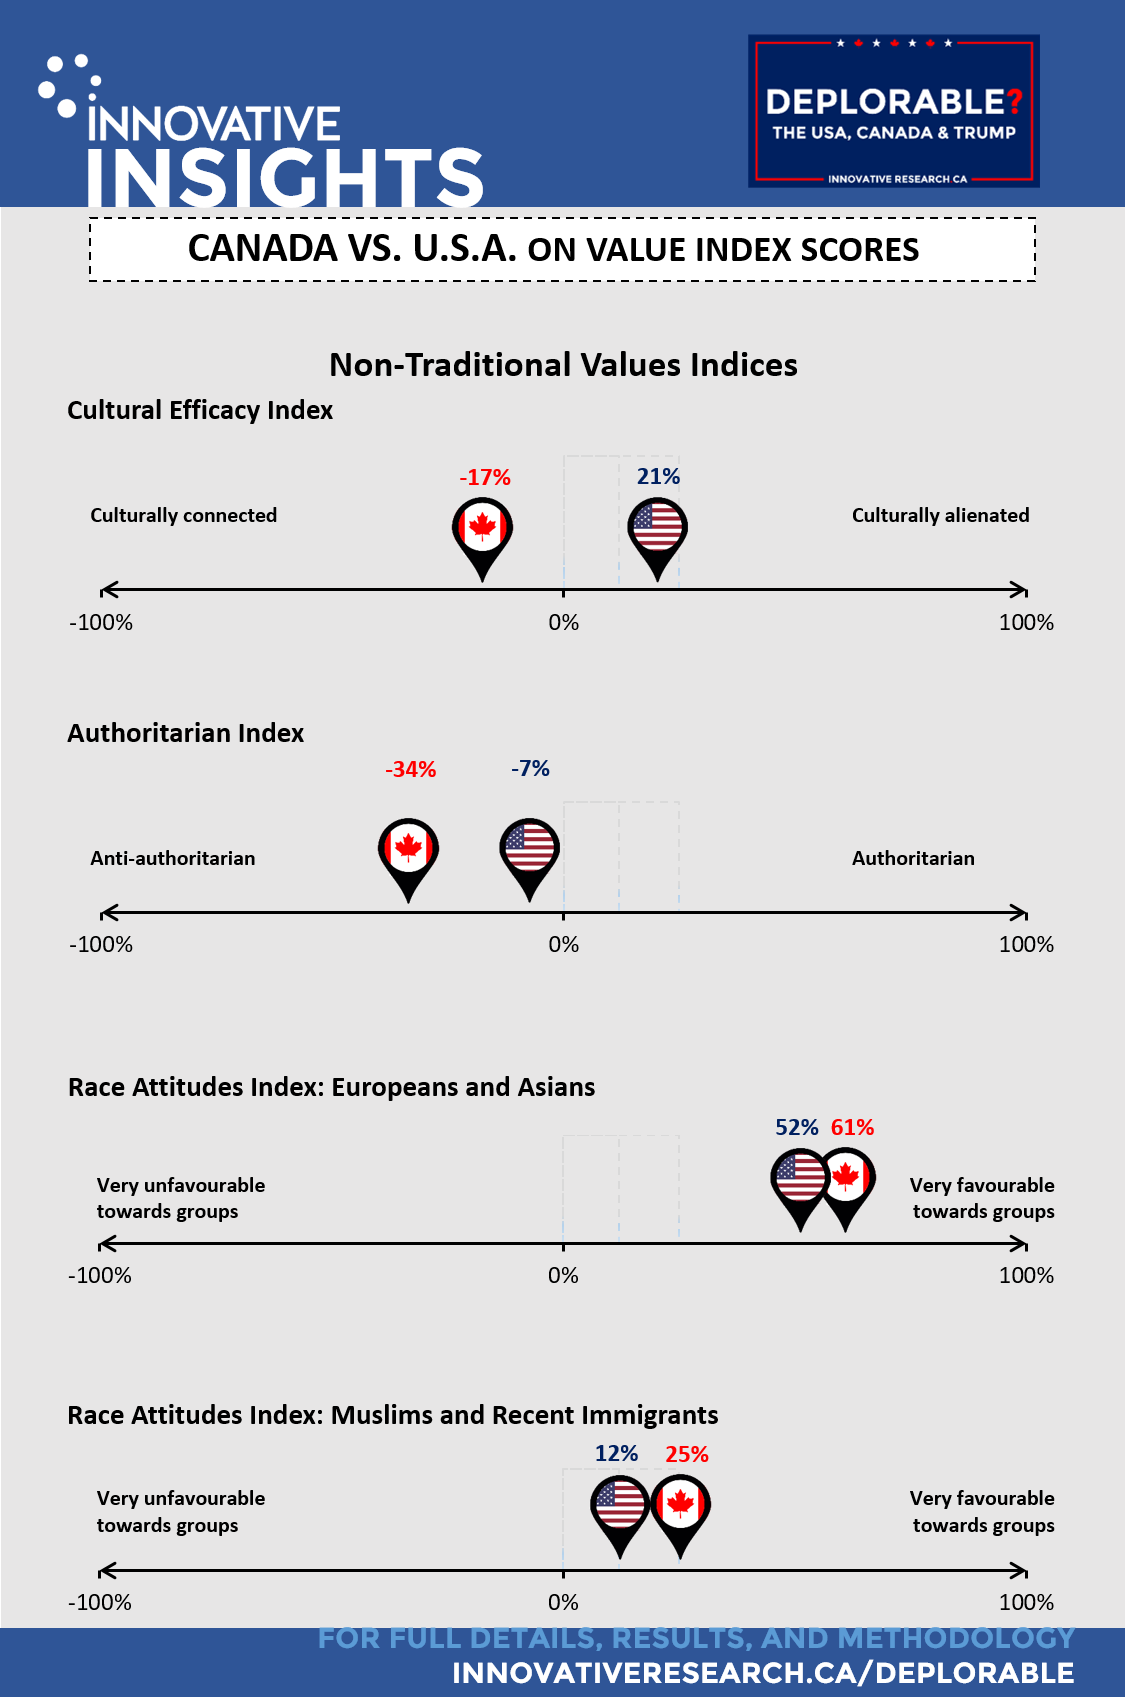 infographic-deplorable-non-traditional-values-indices-rev